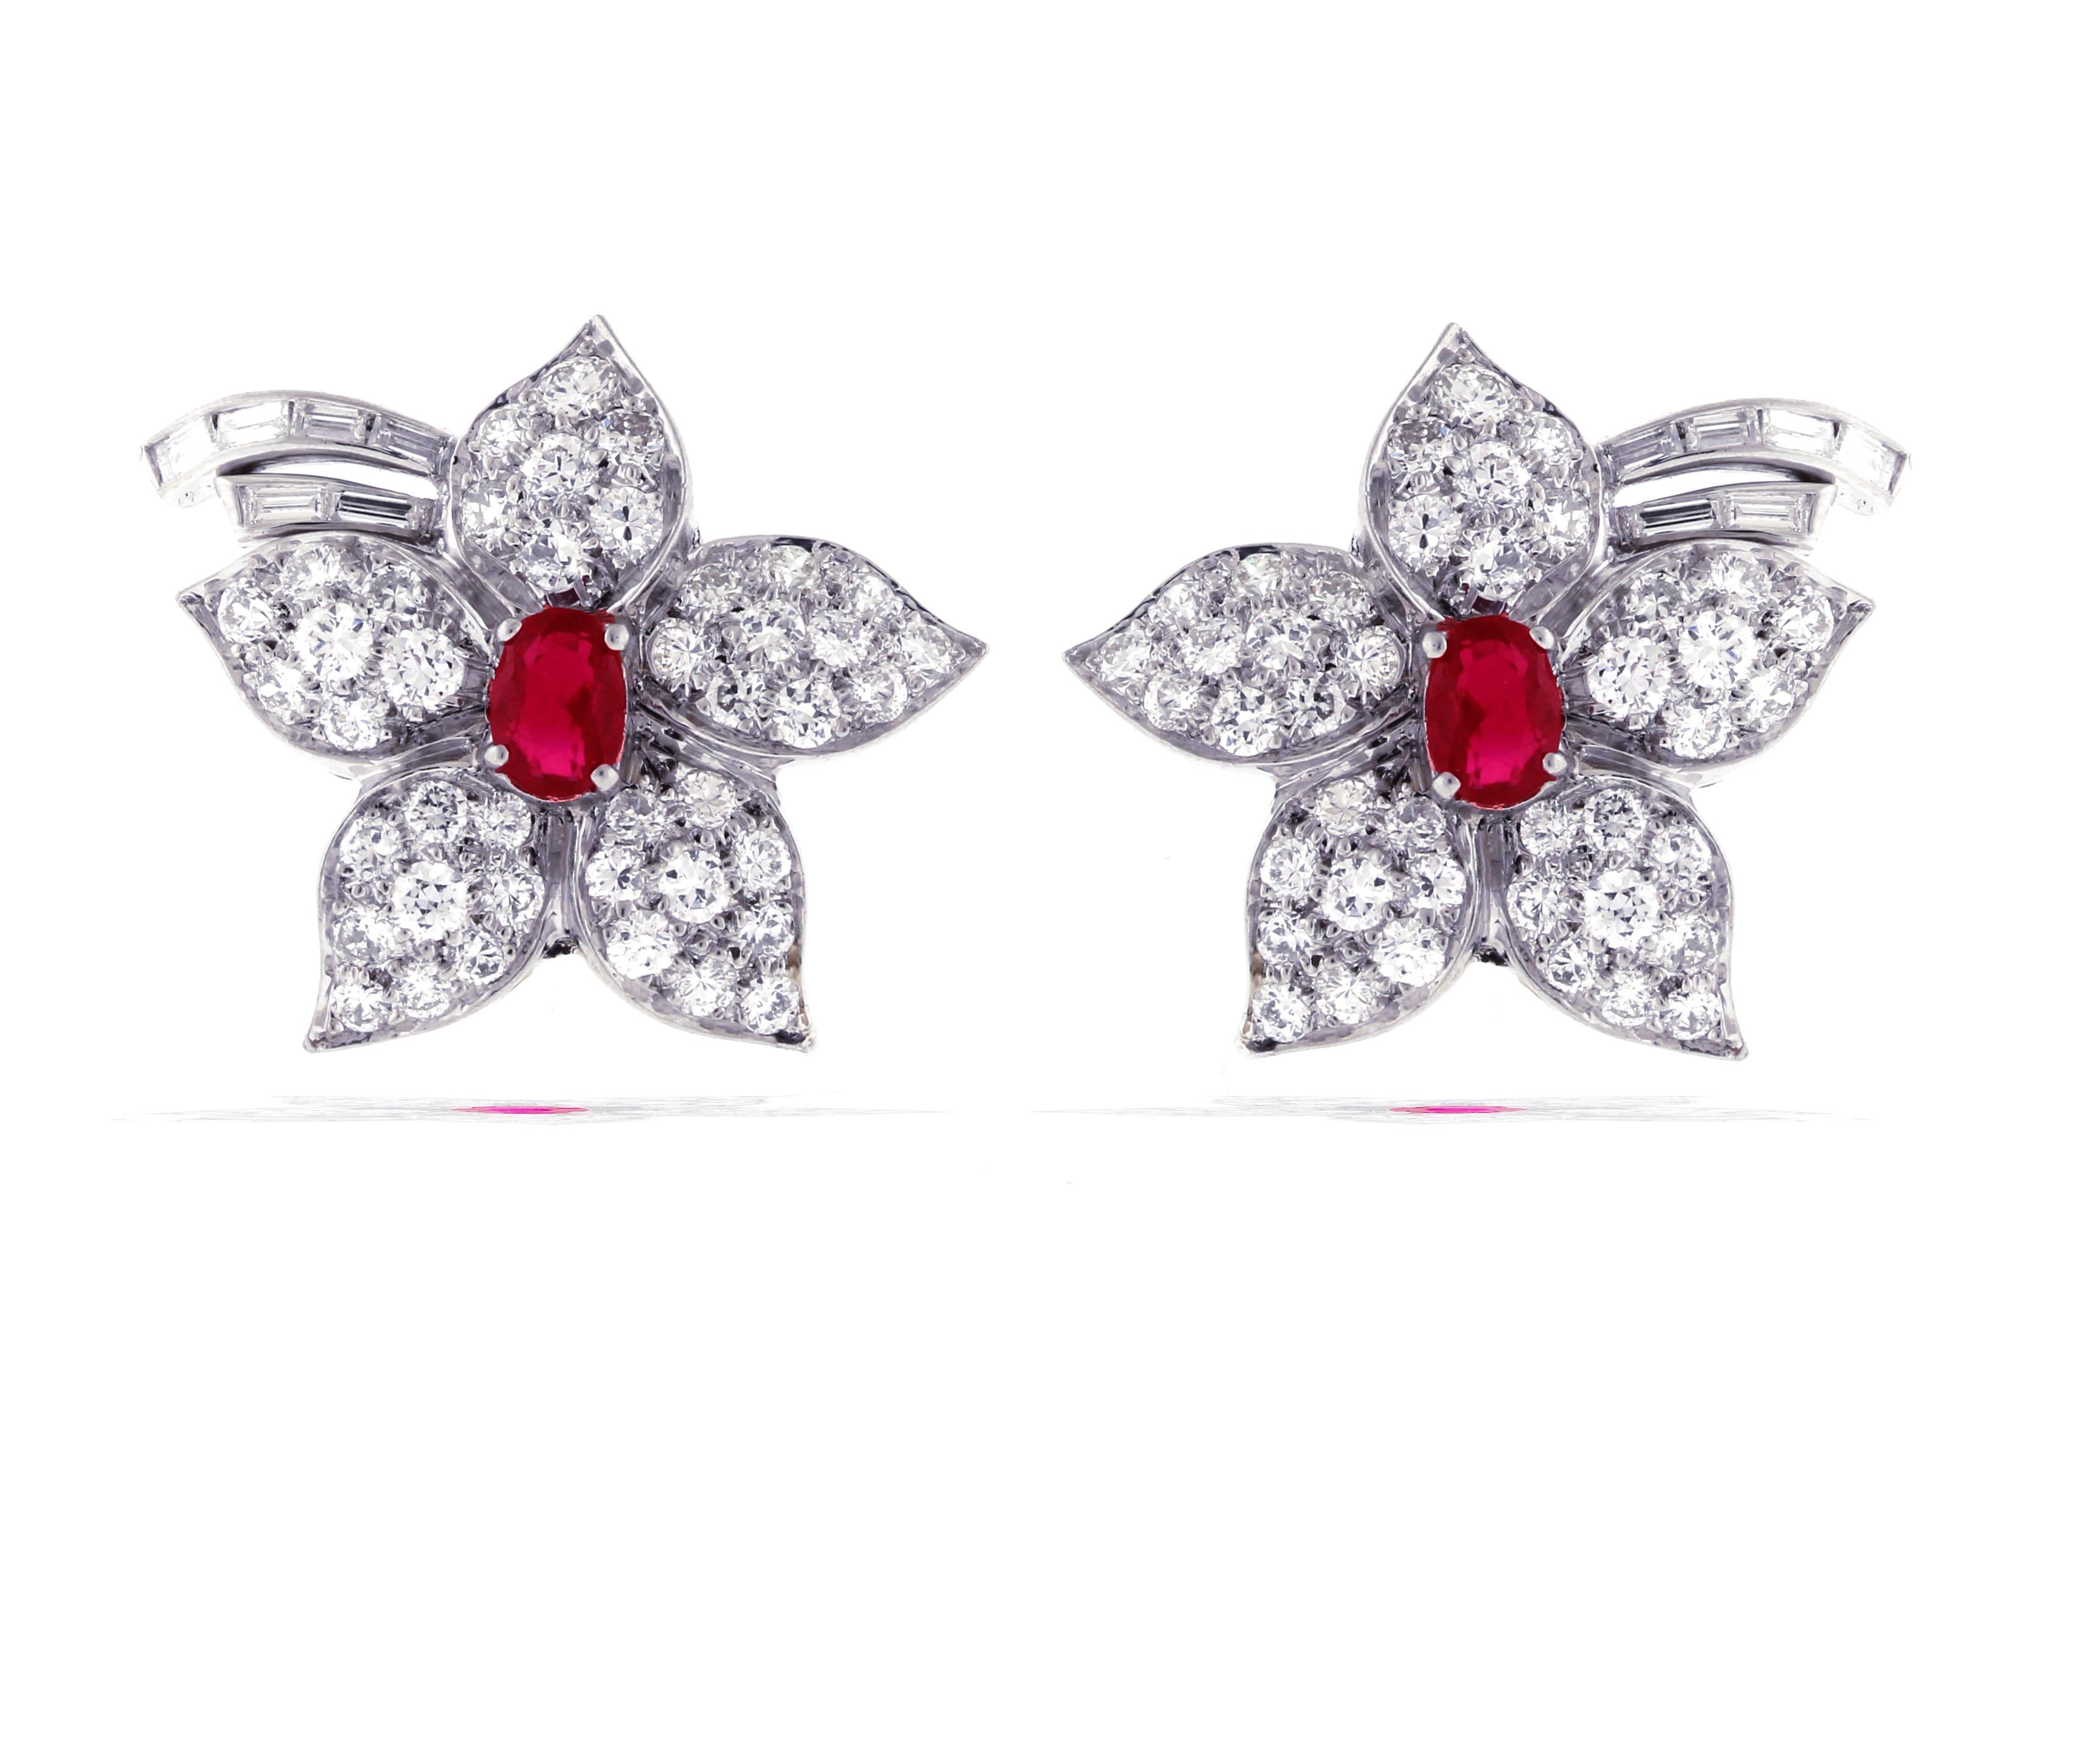 A stunning pair of oval ruby and diamond flower earrings.
• Metal: Platinum
• Circa: 1970s
• Size 7/8ths by 1 1/8th of an inch
• Diamond 82 Rounds diamond weigh 3 carats, 12 Baguette diamonds weigh 1.20 carats:
• 2 oval rubies weigh 1.20 carats
•